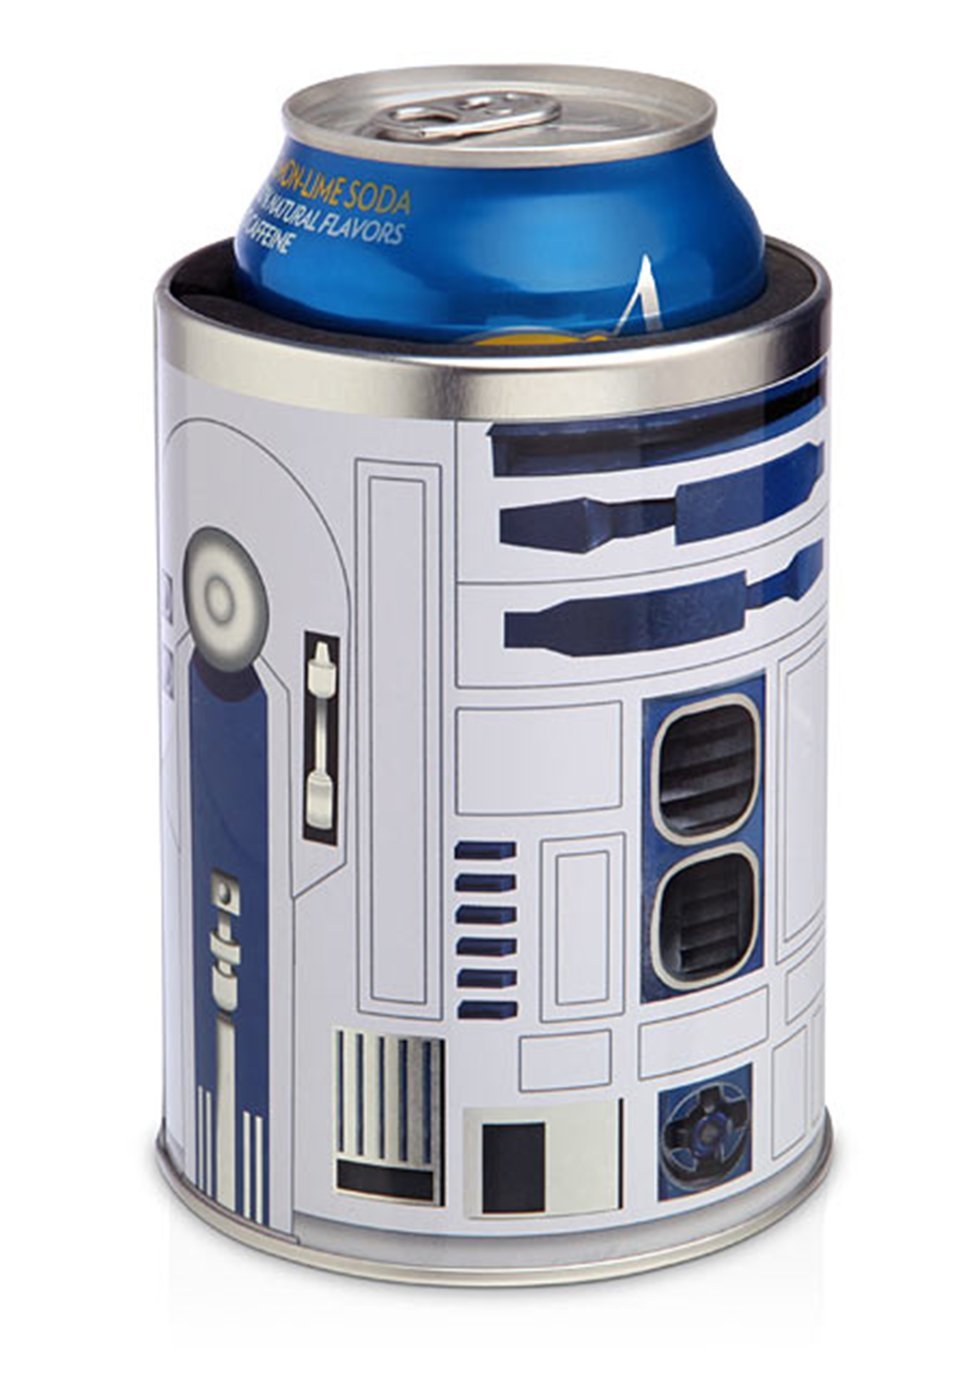 Keep Your Drinks Cool like Hoth with the R2D2 Metal Can Cooler